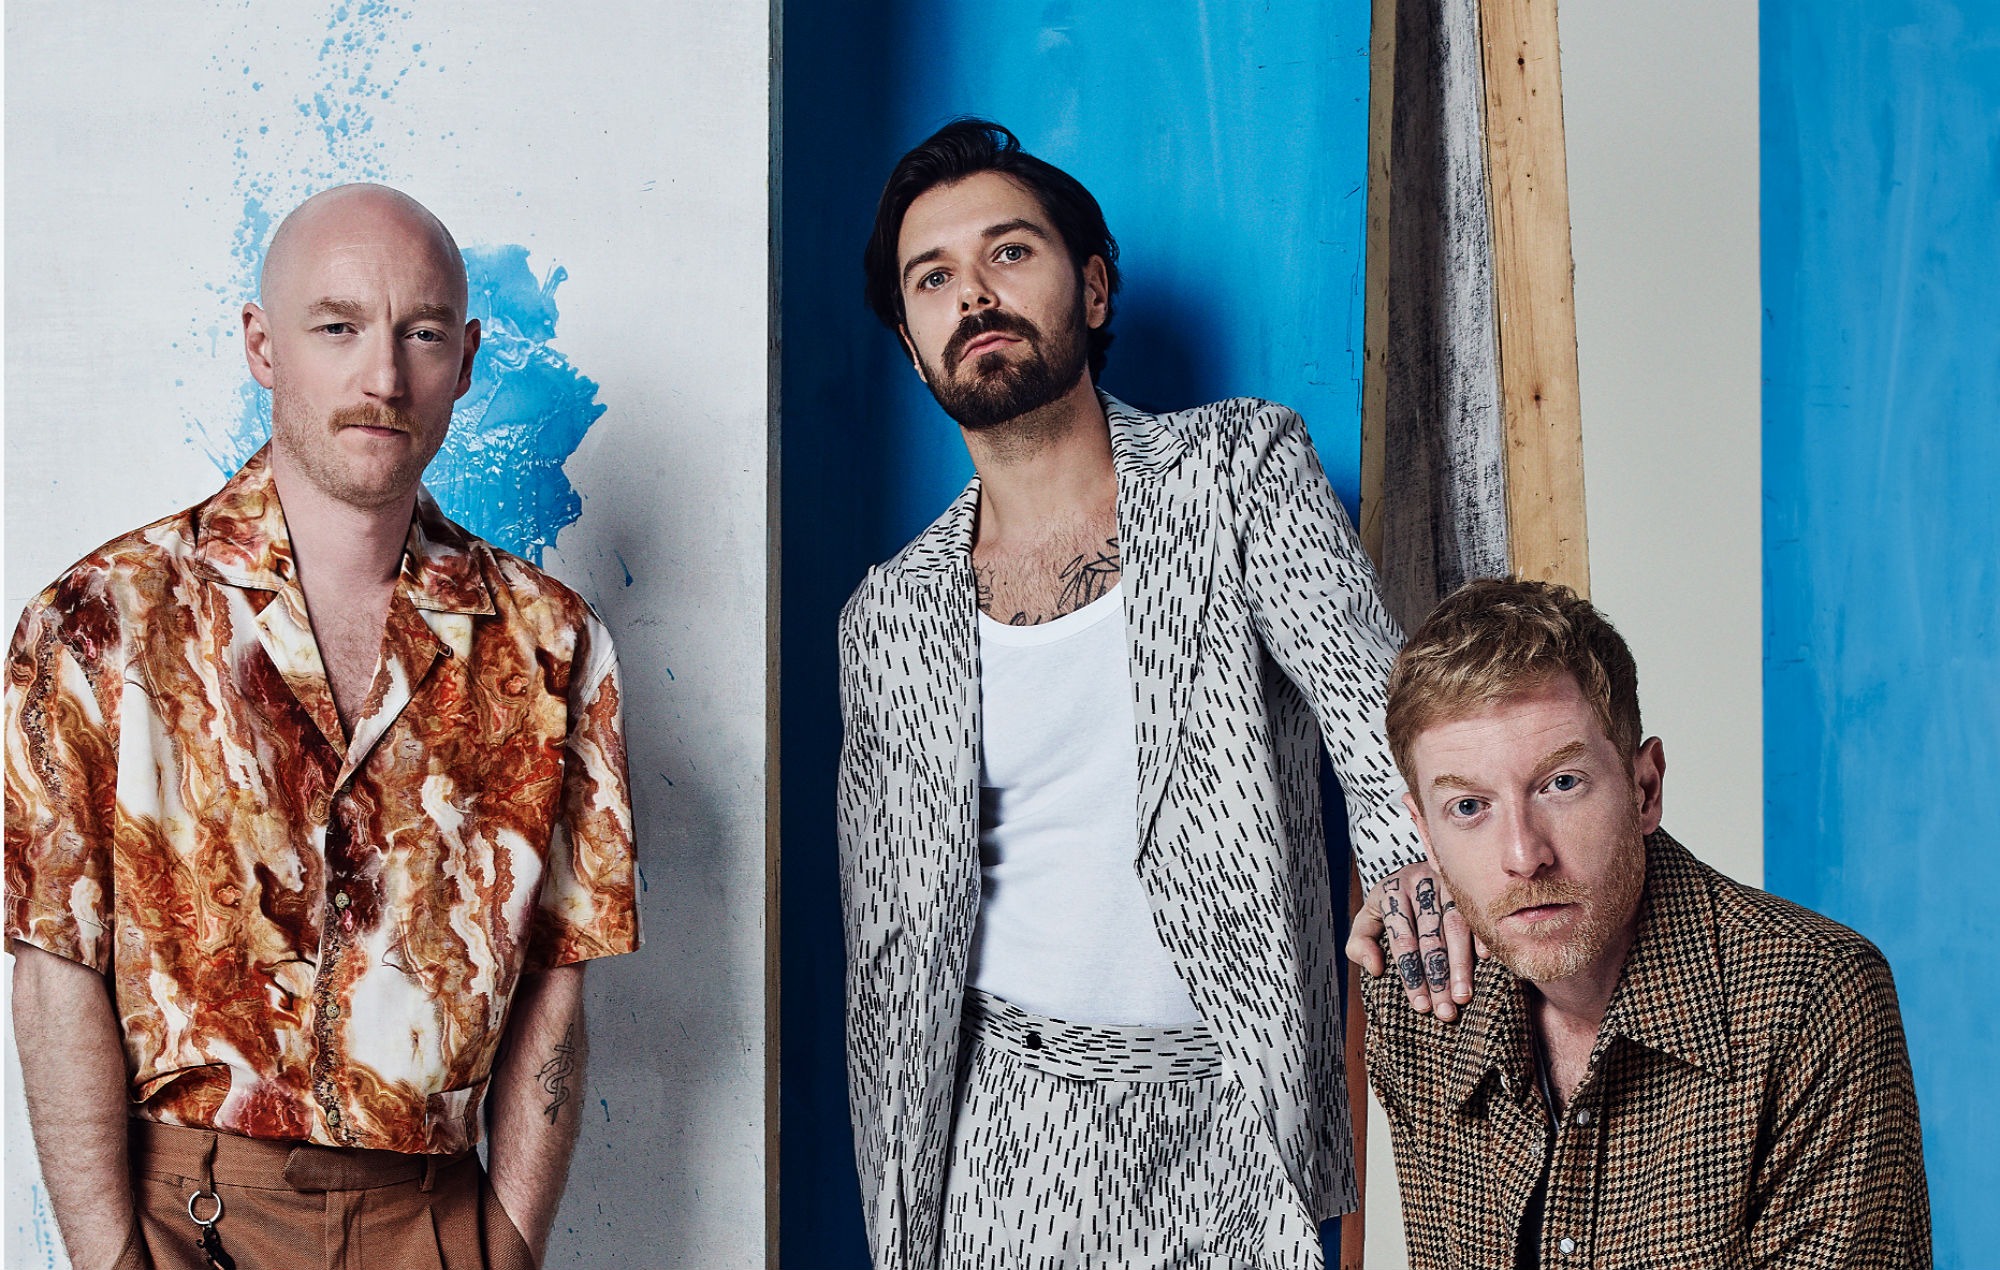 Exclusive – Biffy Clyro return with ‘Instant History’: “I feel a responsibility to the world now”